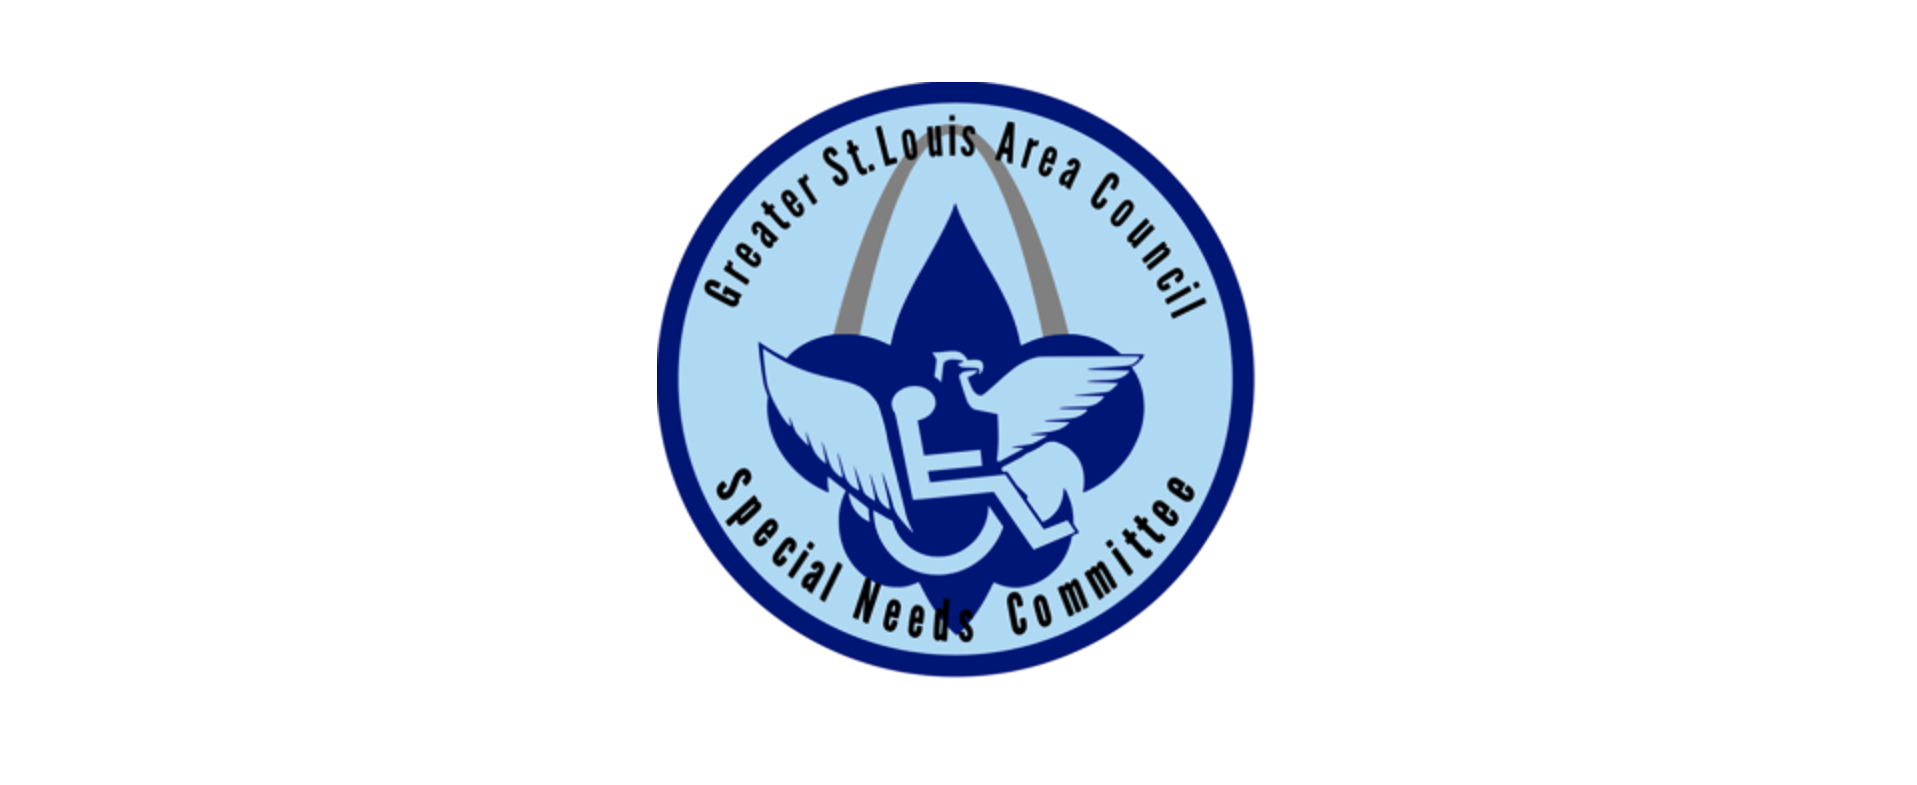 Special Needs Committee logo